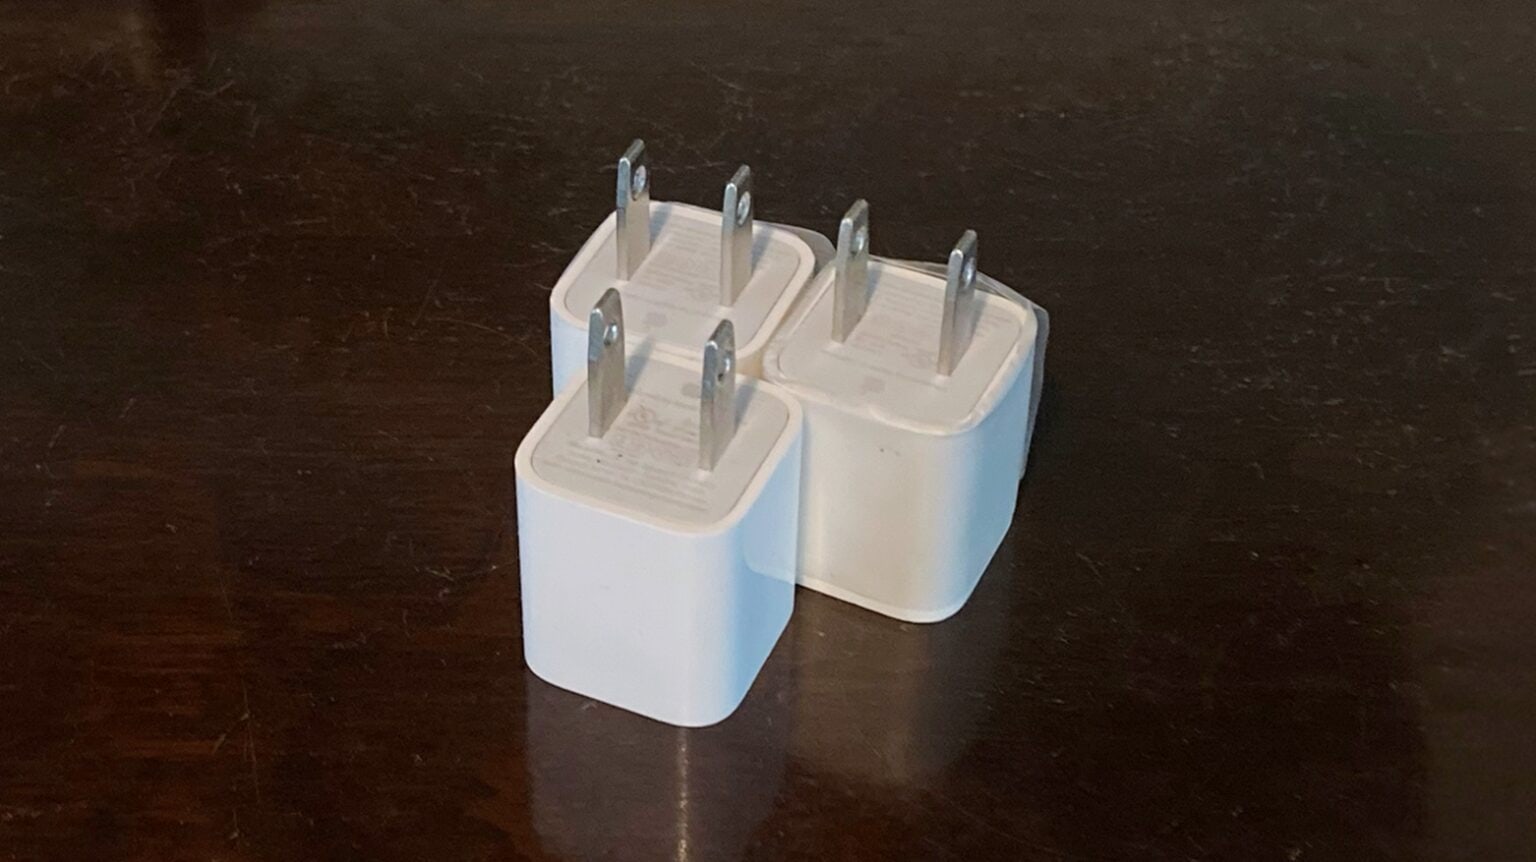 Does anyone really need another iPhone charger?